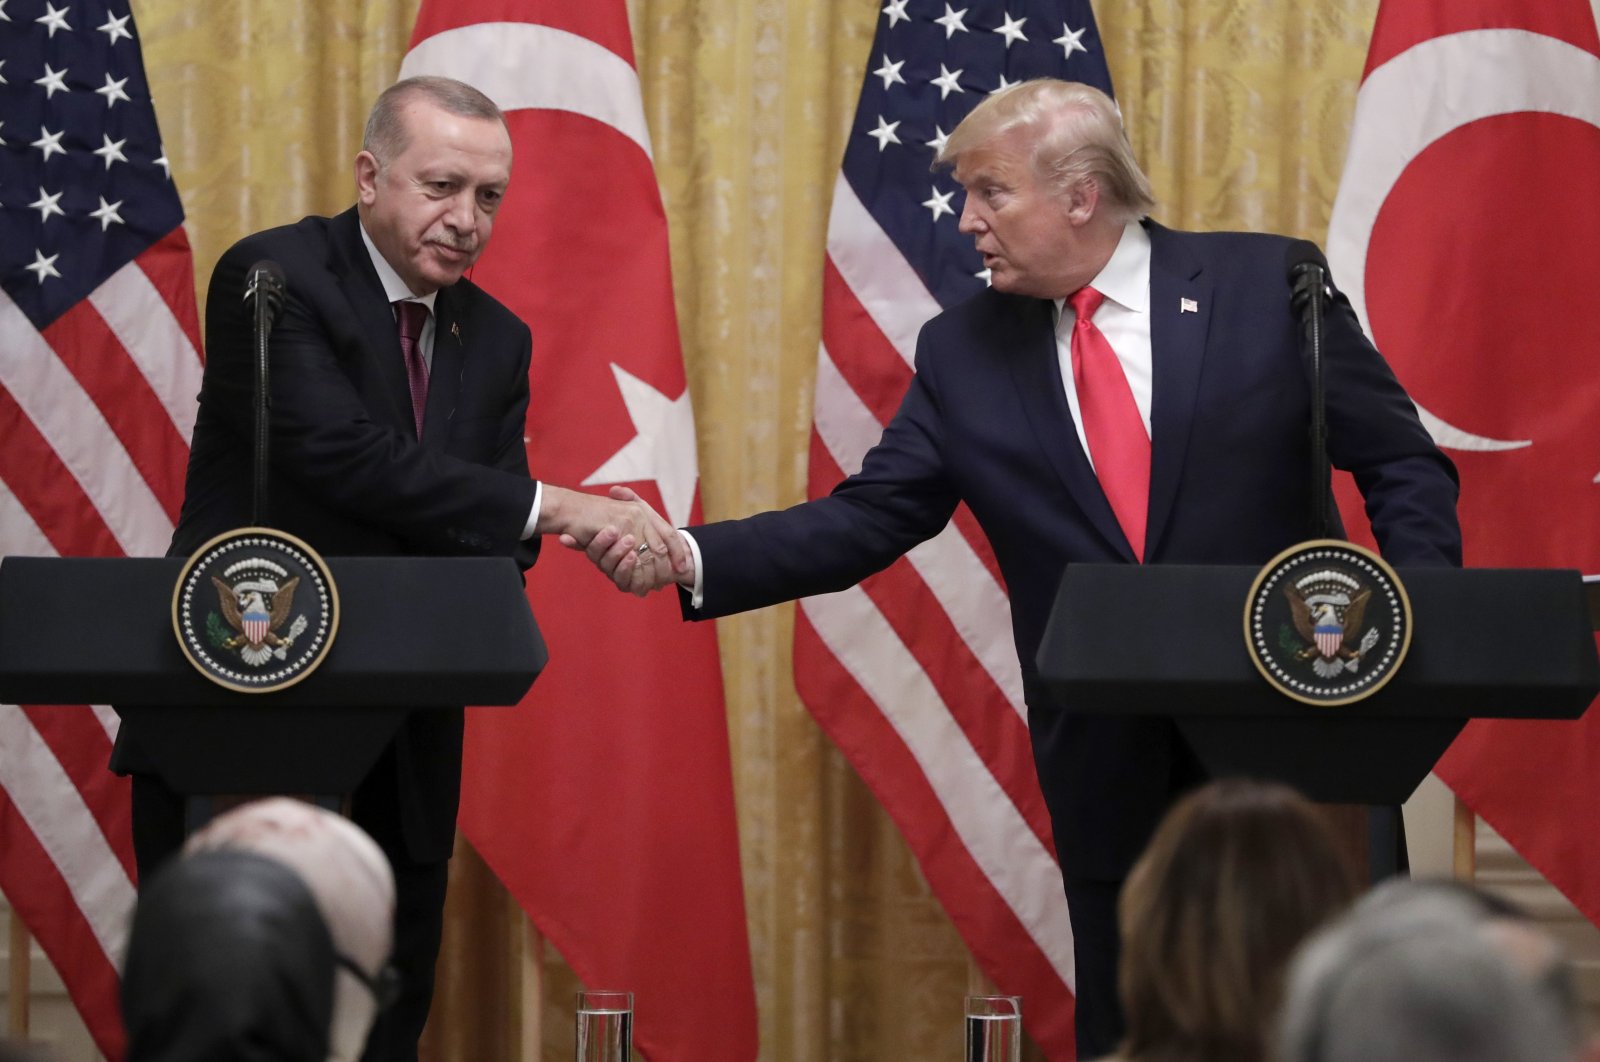 President Recep Tayyip Erdoğan (L) and U.S. President Donald Trump shake hands during a news conference in the East Room of the White House, Washington, Nov. 13, 2019. (AP Photo)